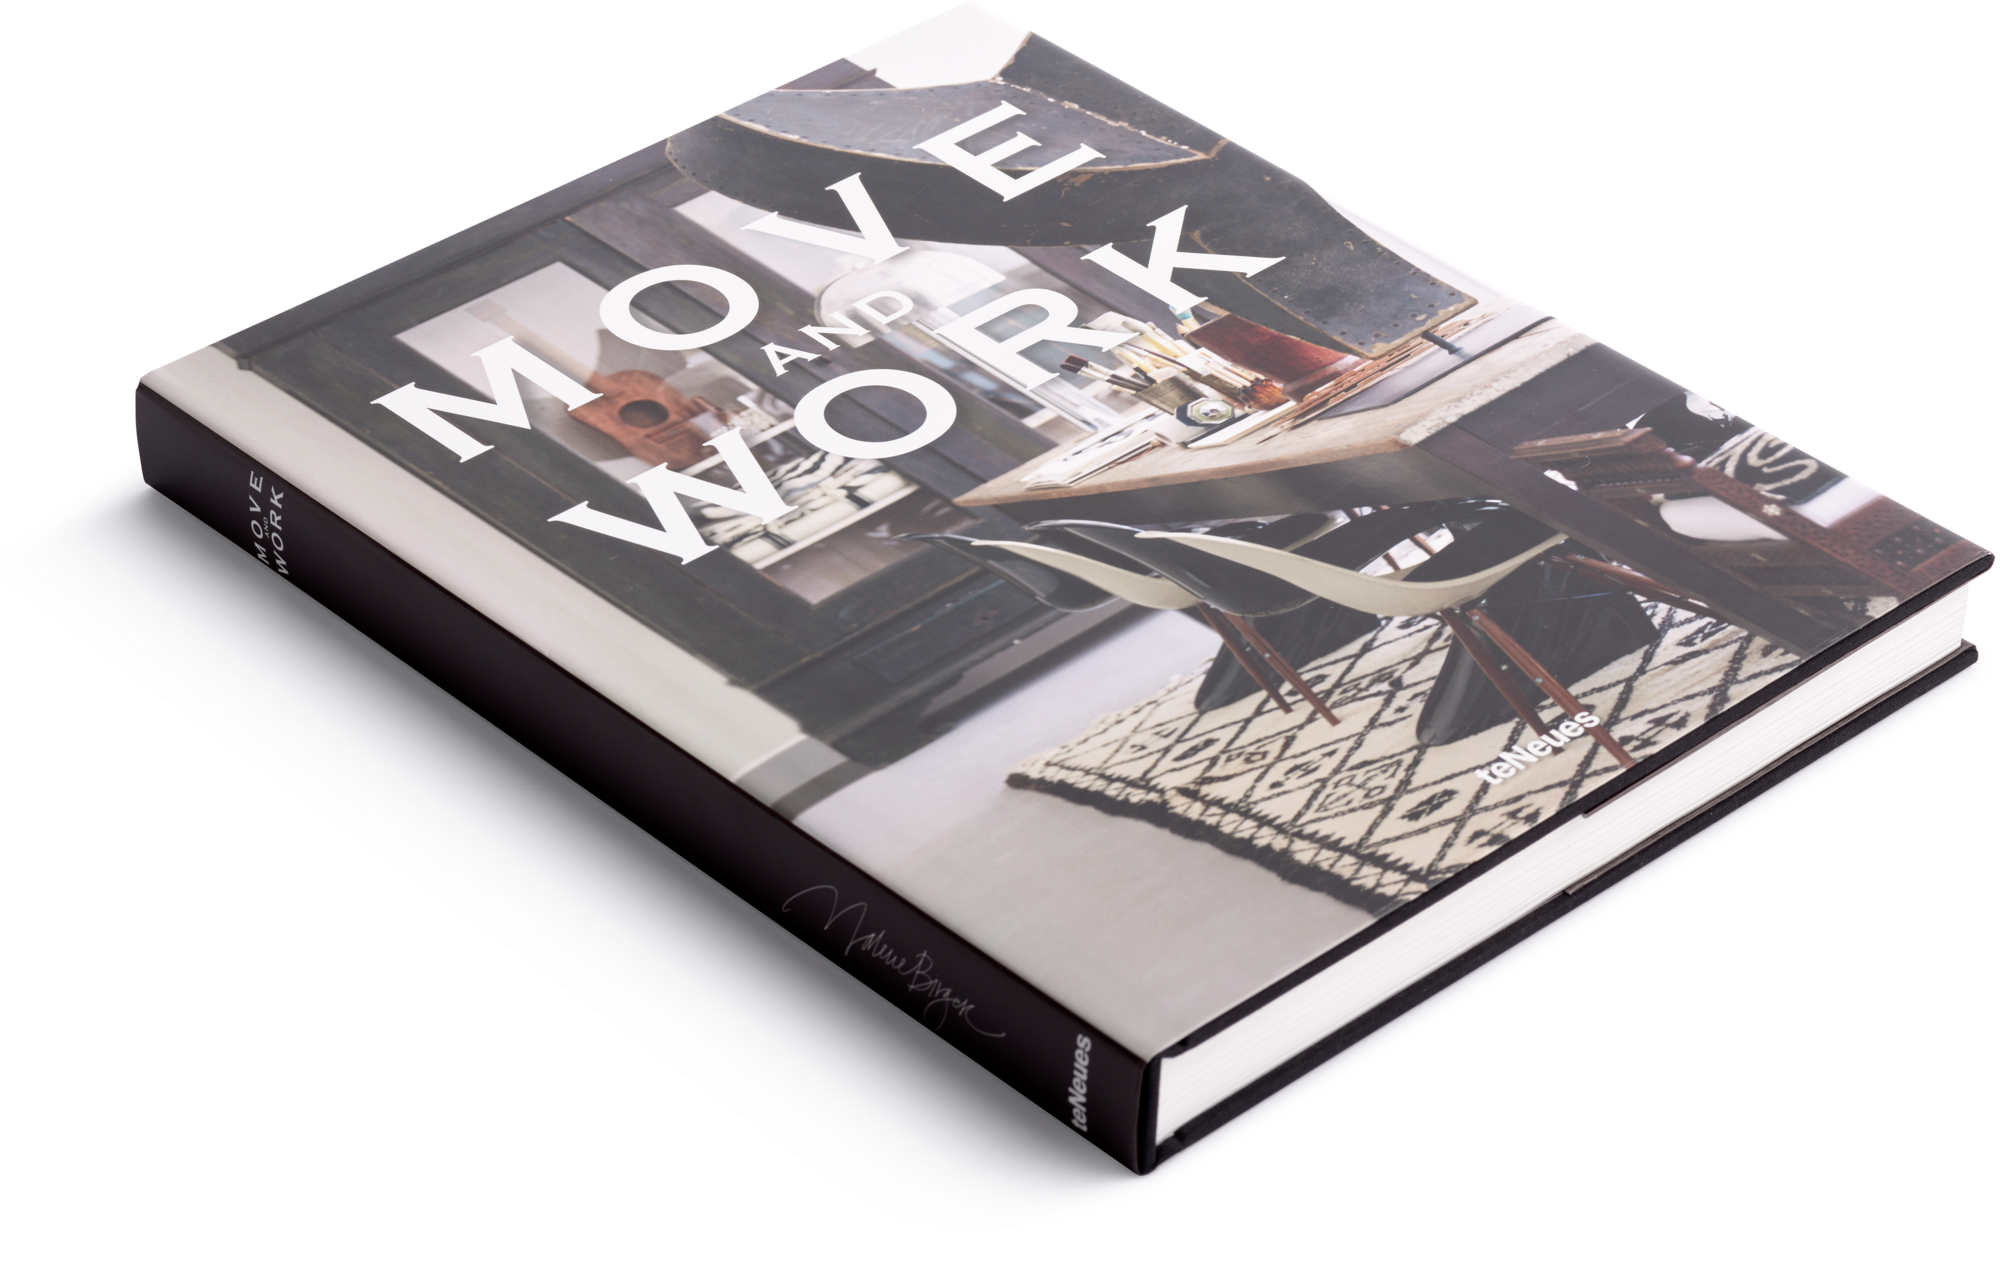 Move and Work book